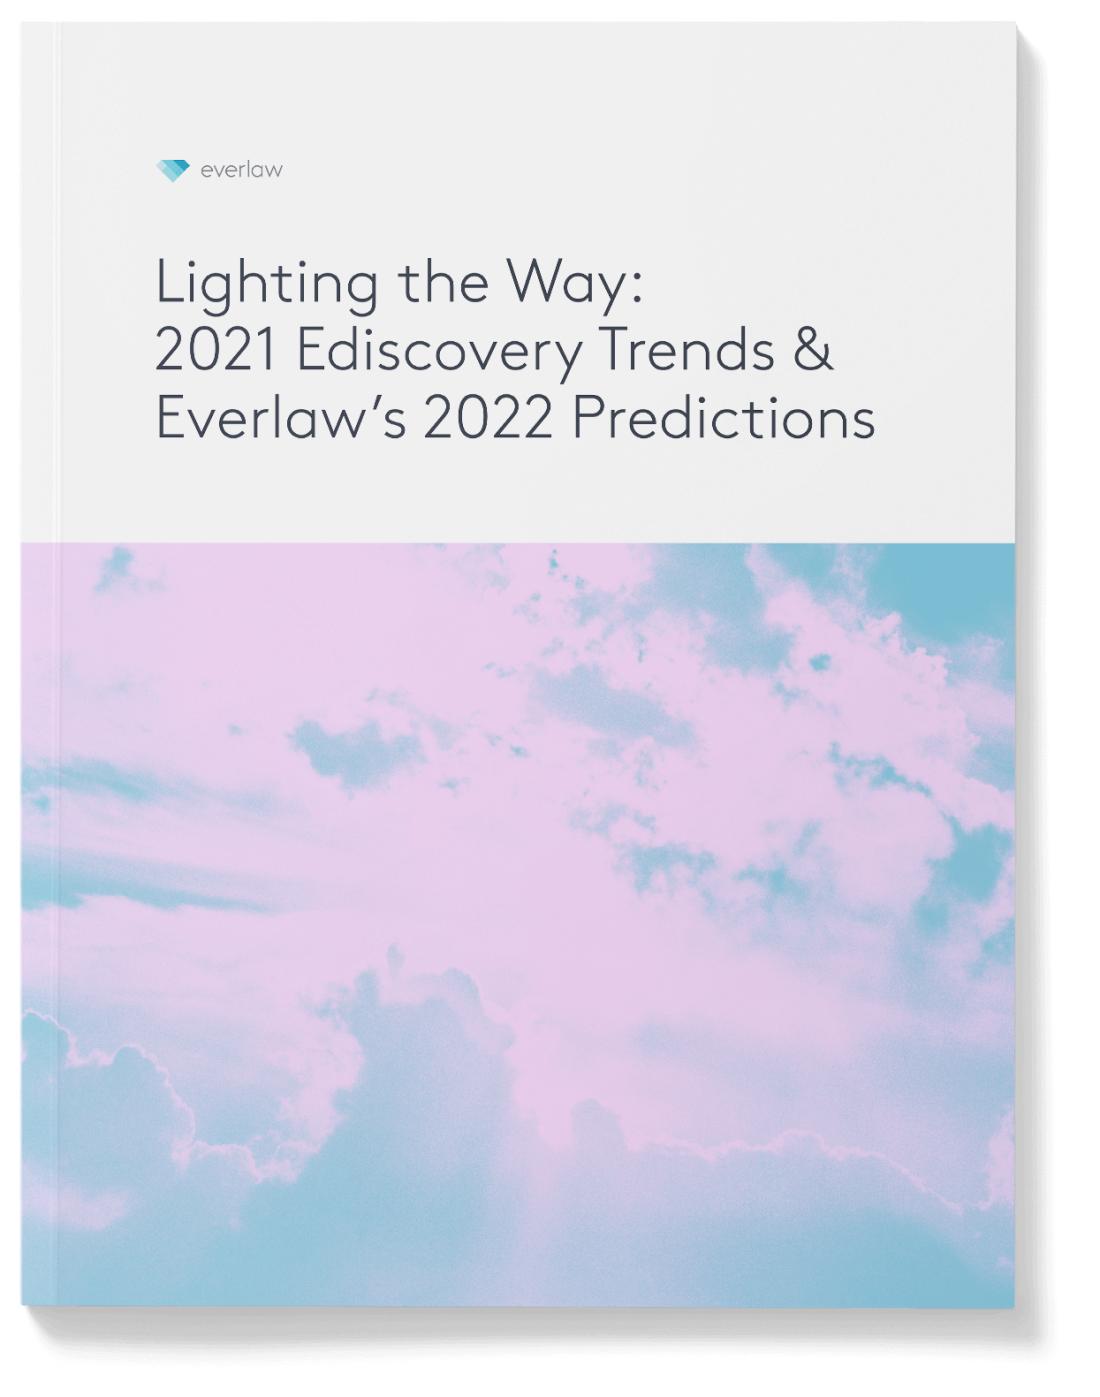 WP rightsized-Lighting the Way 2021 Ediscovery trends cover